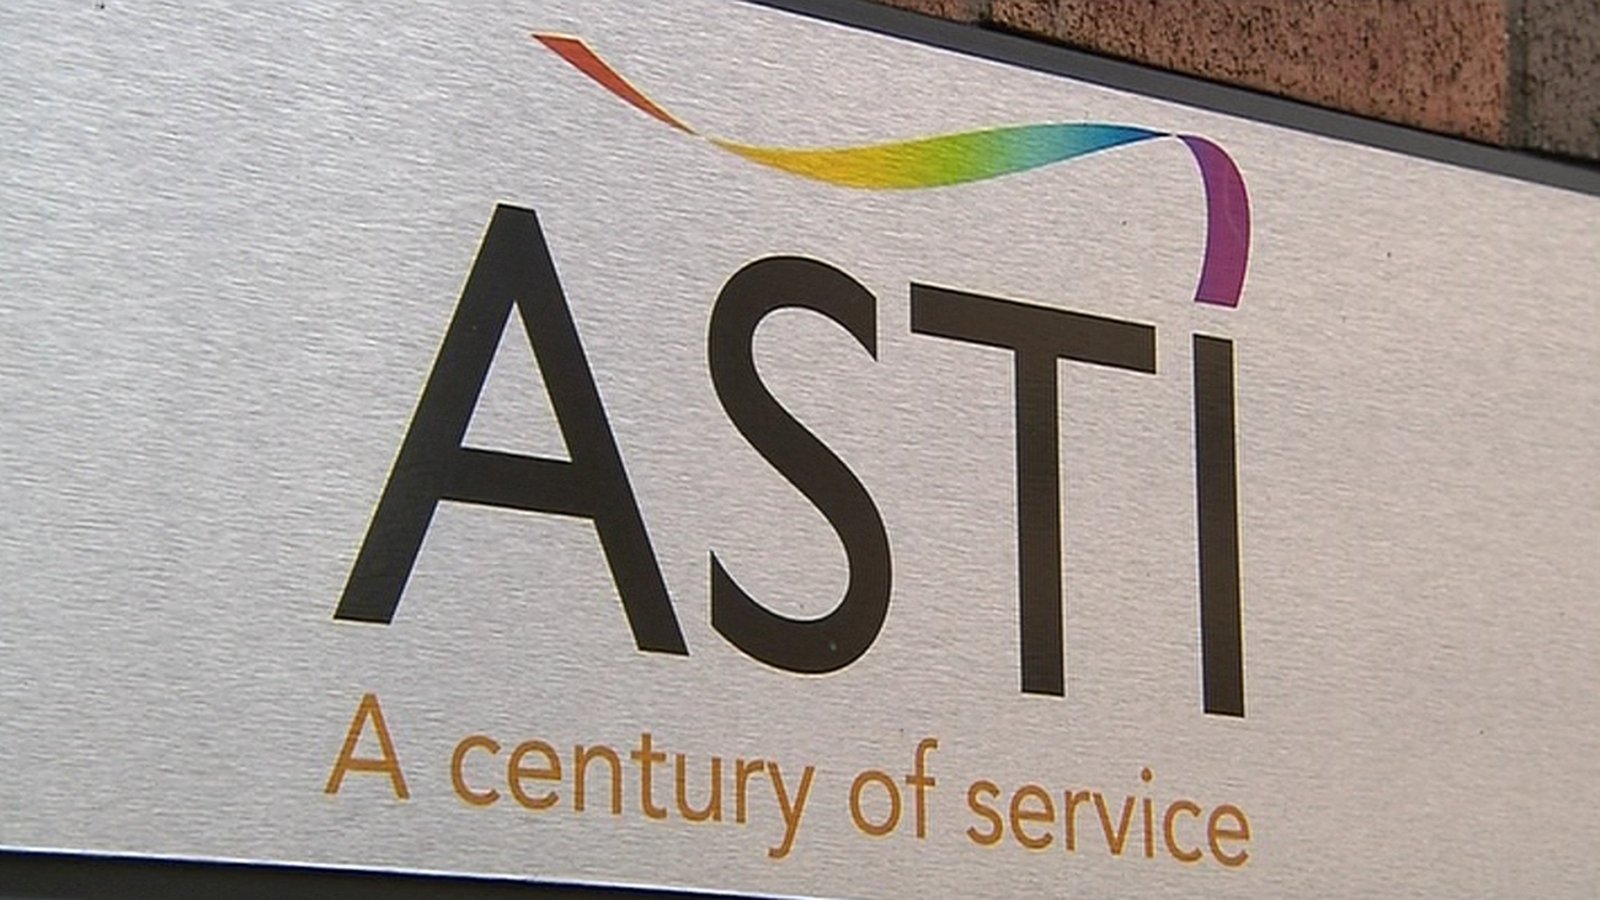 ASTI members vote for industrial action on Kovid issues

